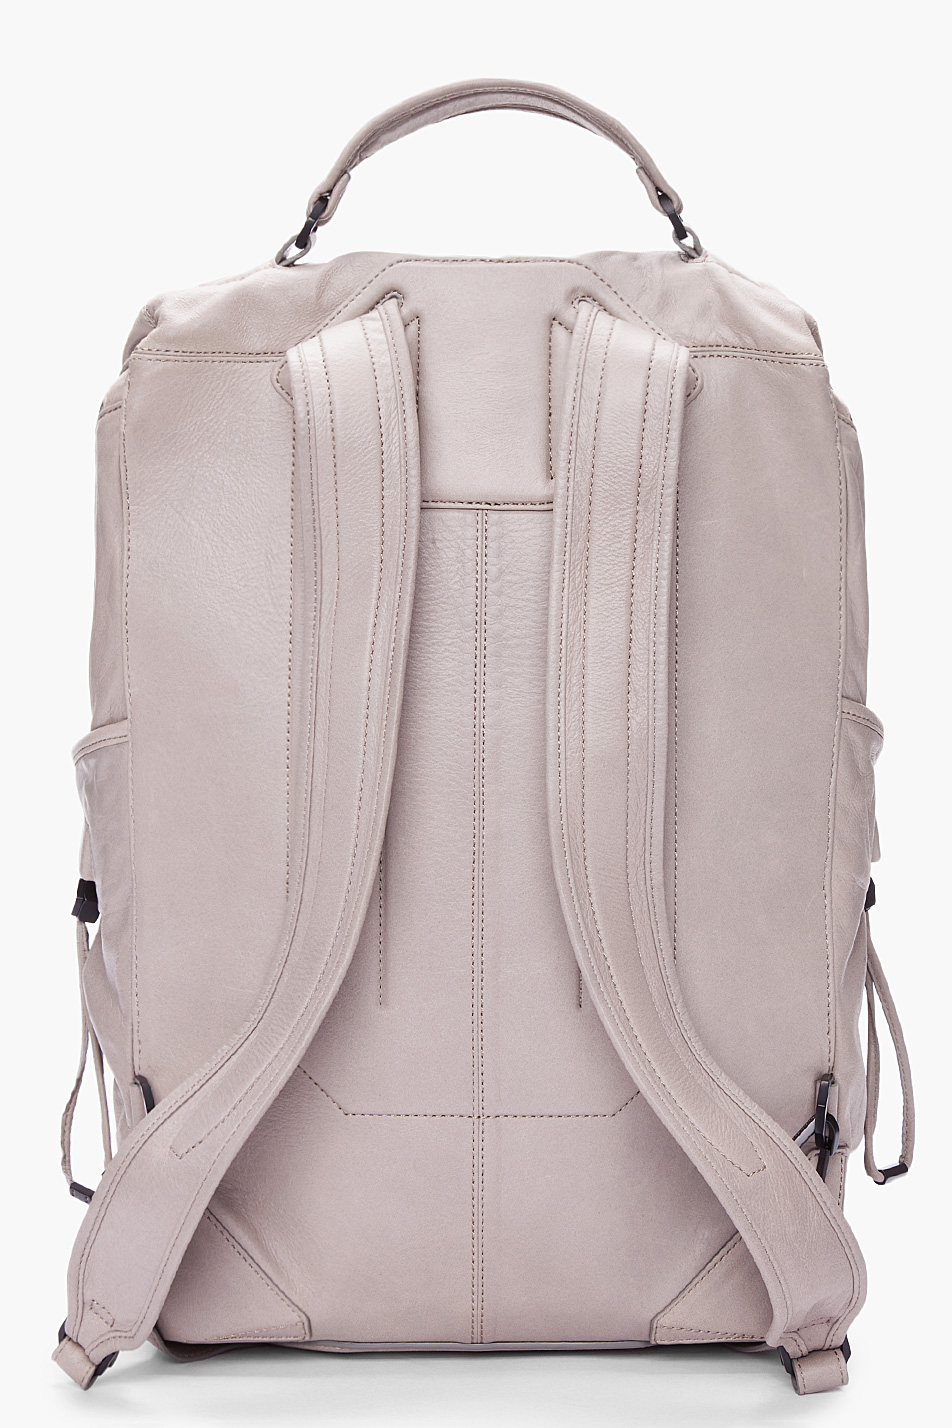 Alexander Wang Leather Wallie Backpack in Grey (Gray) for Men - Lyst